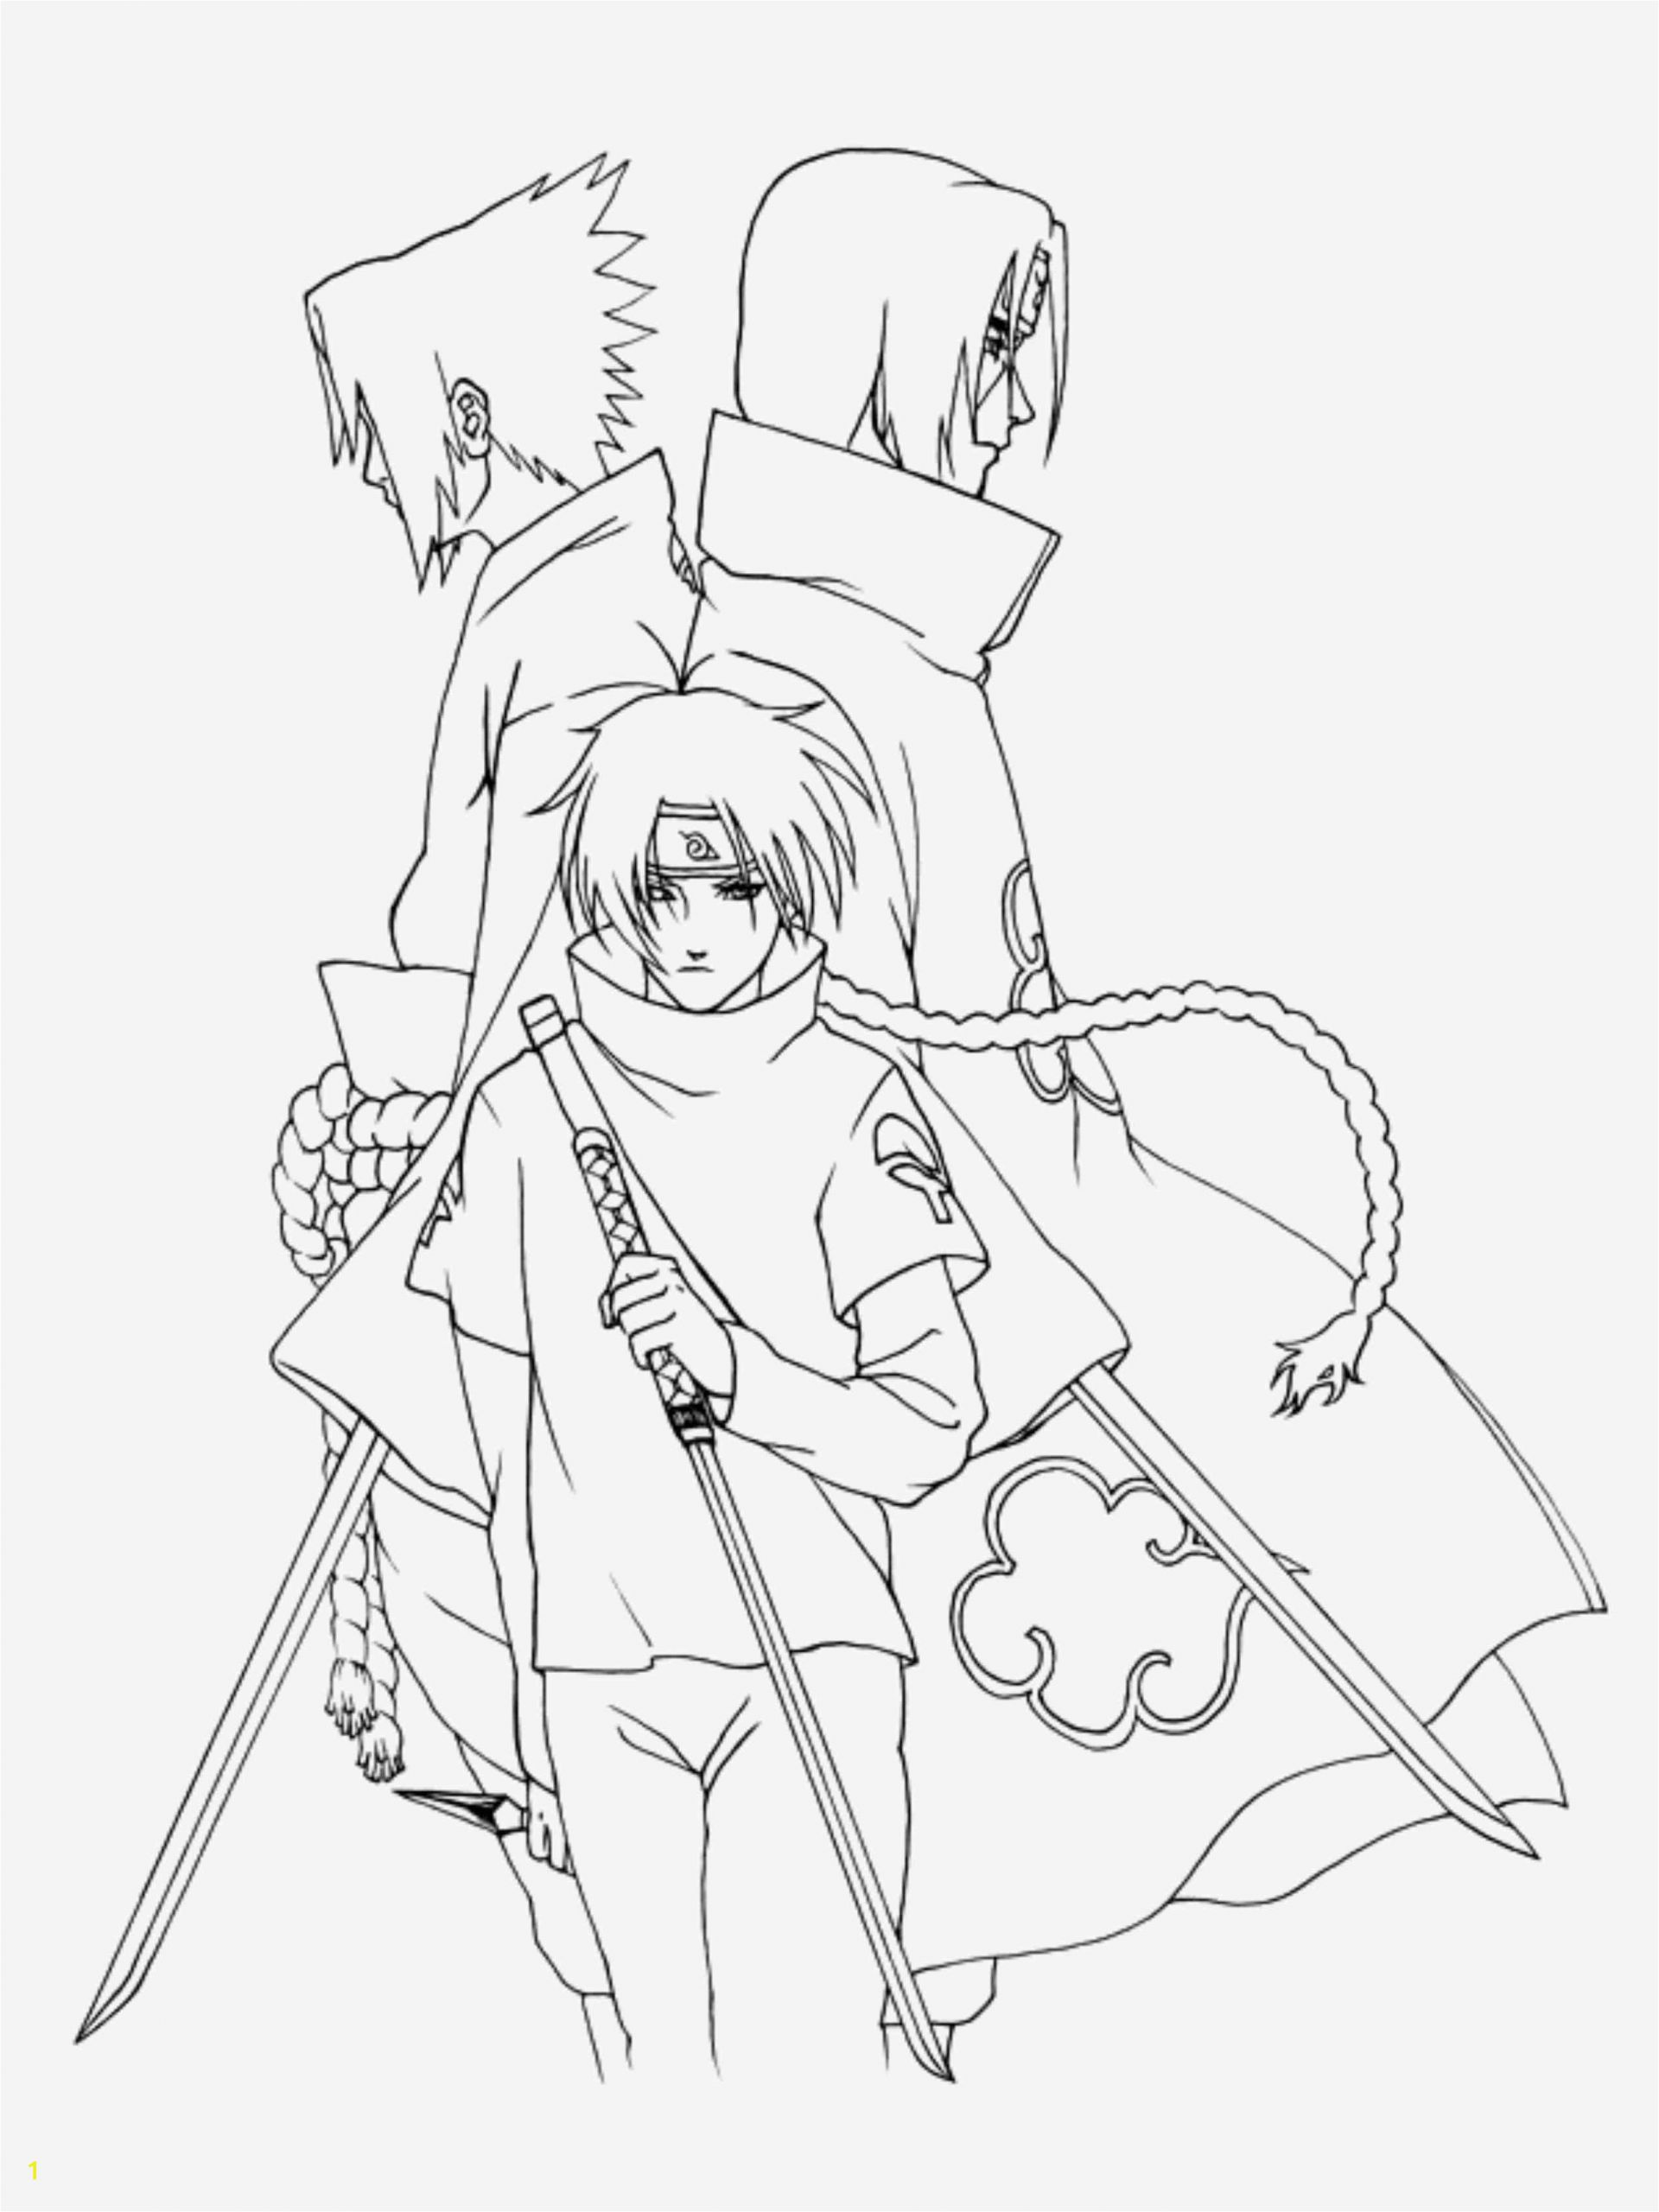 Naruto Shippuden Coloring Pages to Print Coloring Pages Naruto Shippuden Characters Printable